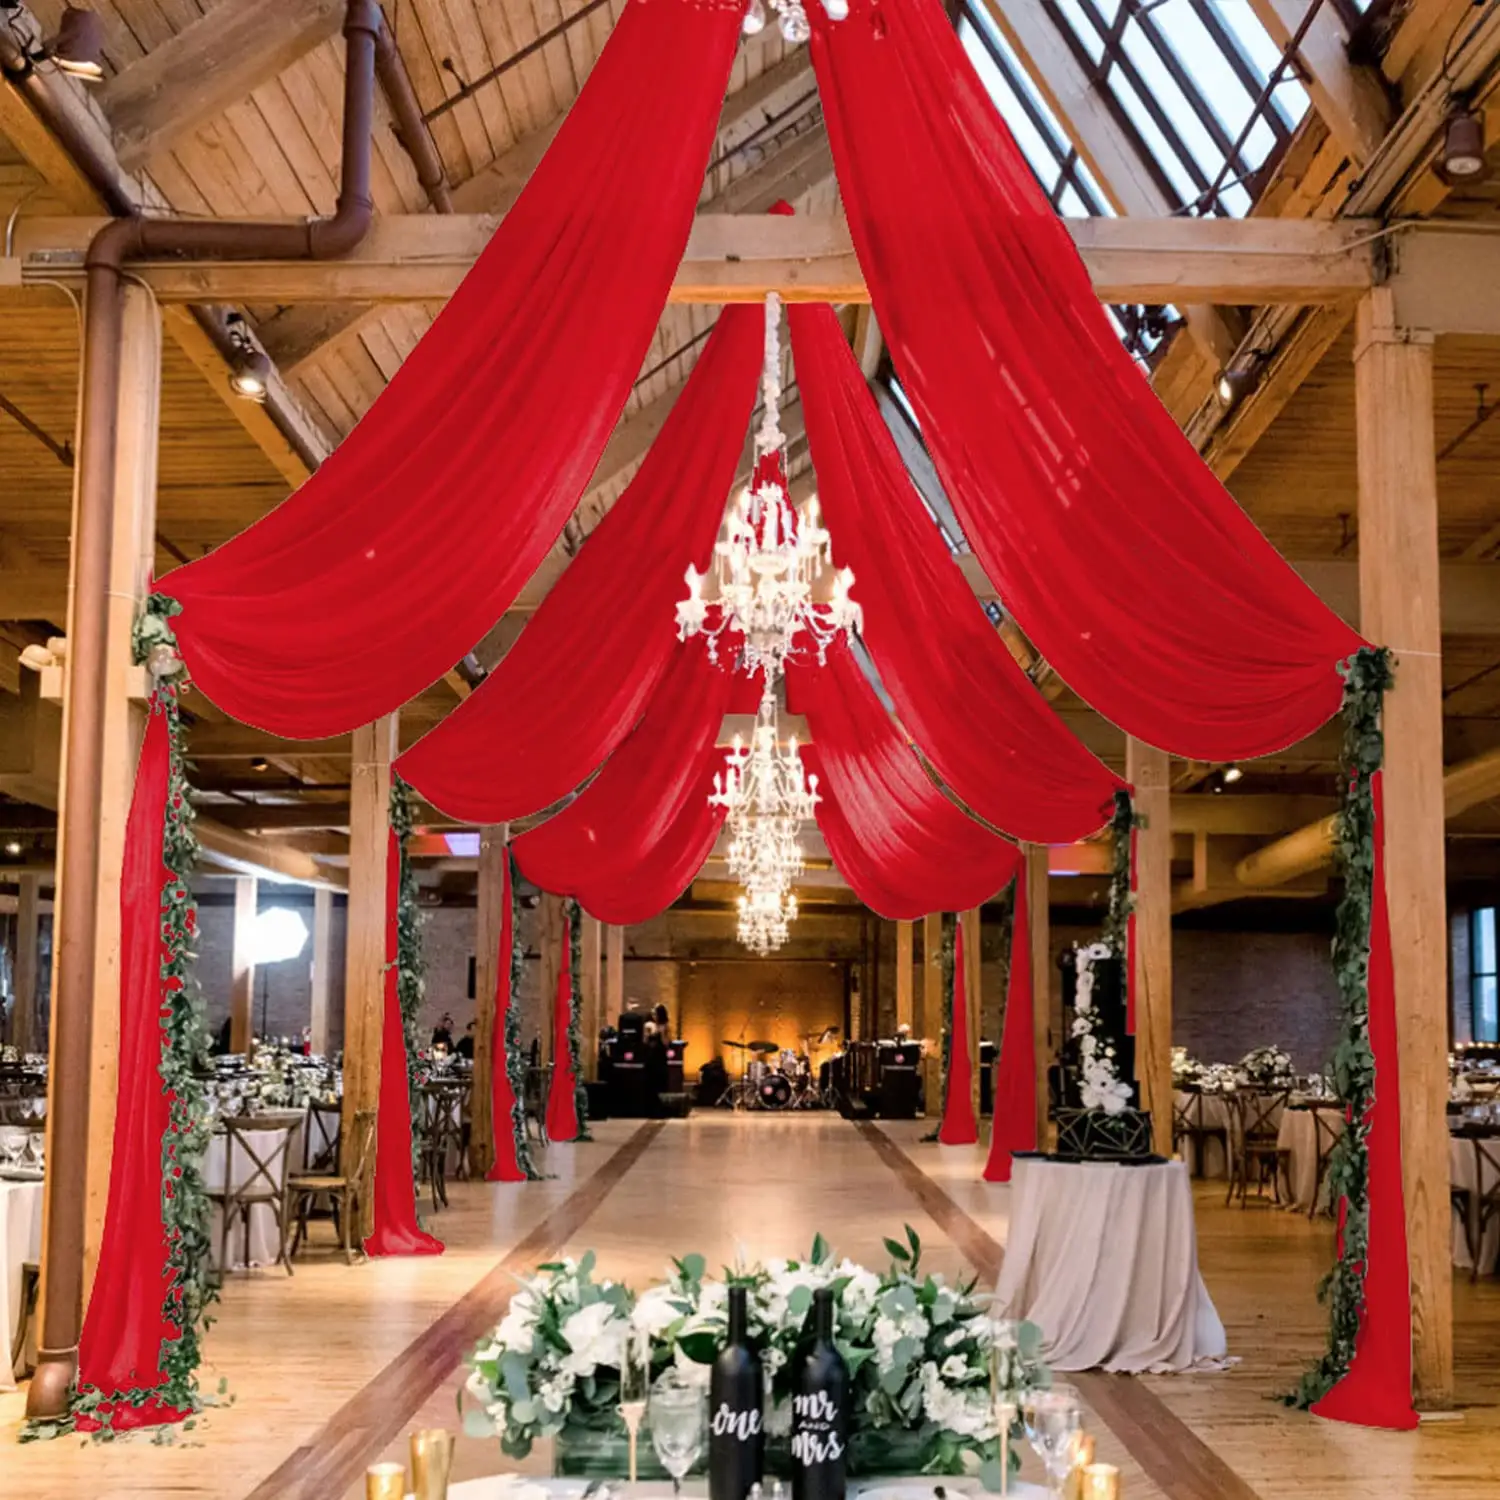 Red Parties Wedding Drapery 2 Panels 5x20FT Chiffon Curtain Backdrop ceiling drapes decoration wedding Arch Draping Fabric